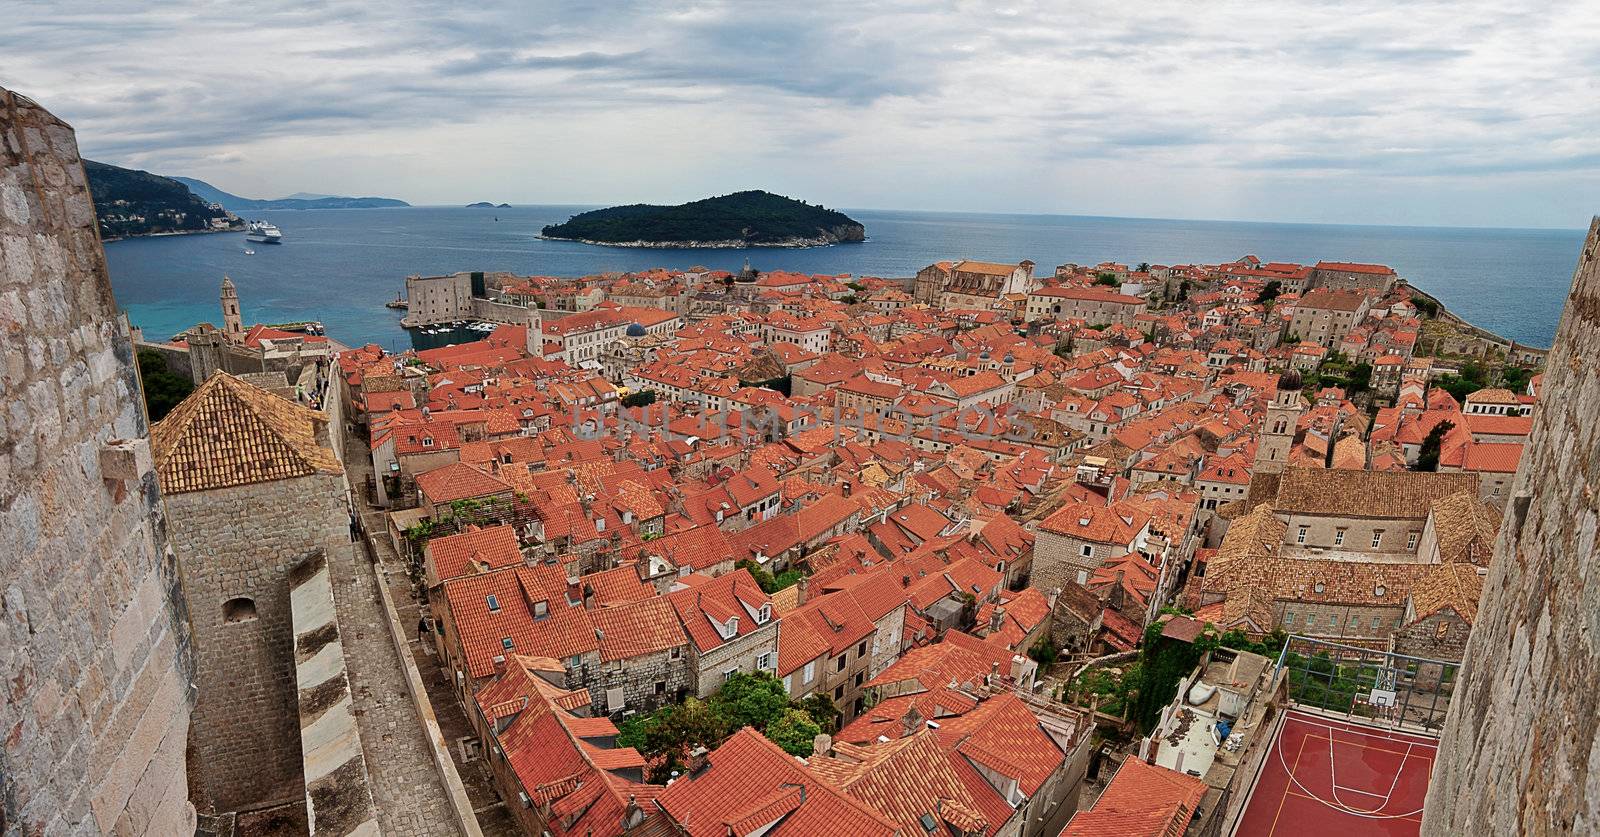 Panorama of the old city of Dubrovnik by Lamarinx